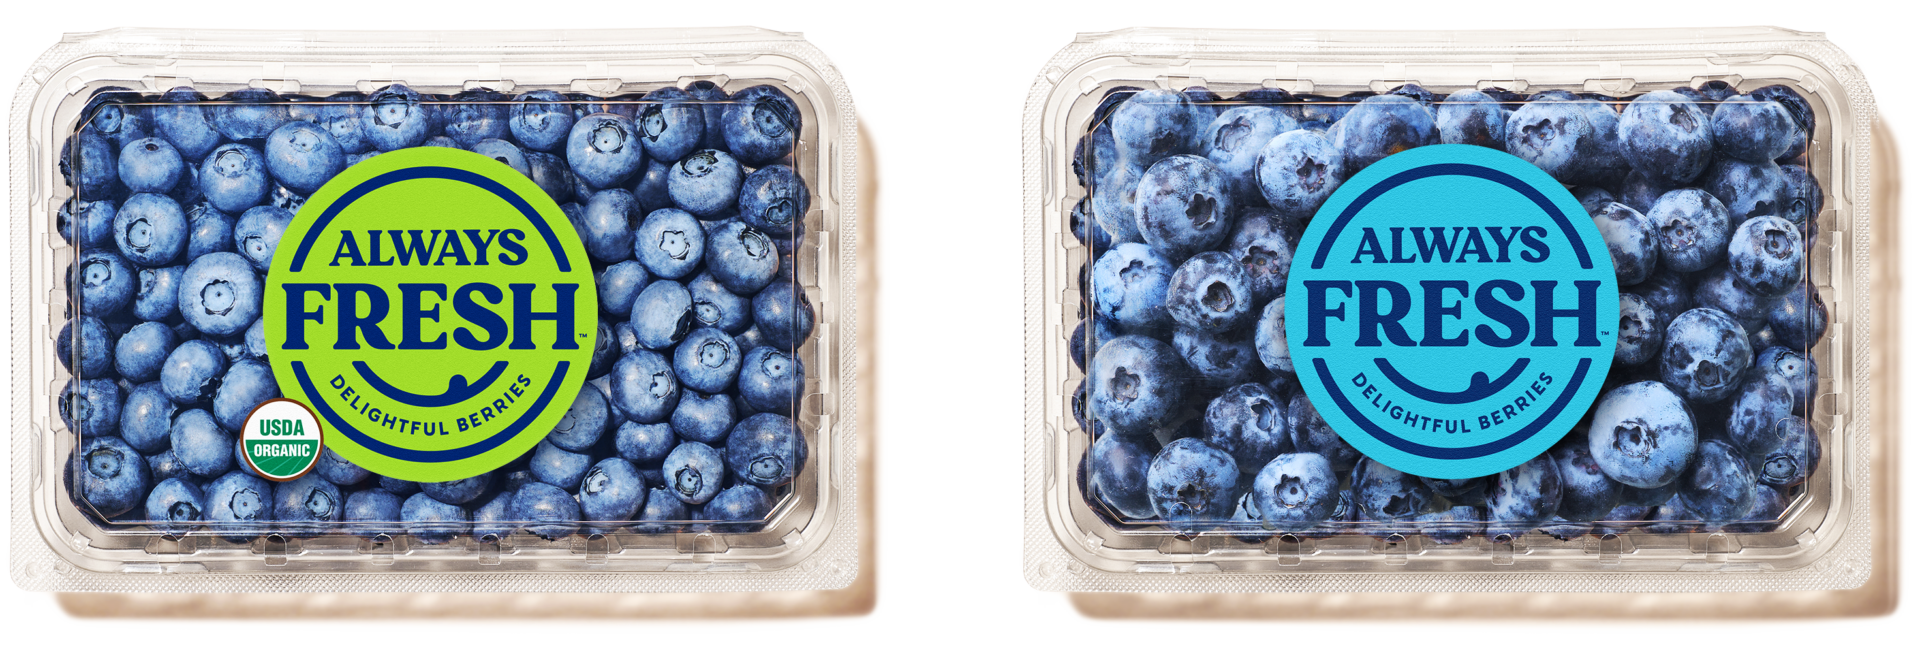 Image of Always Fresh blueberries and jumbo blueberries in a container.